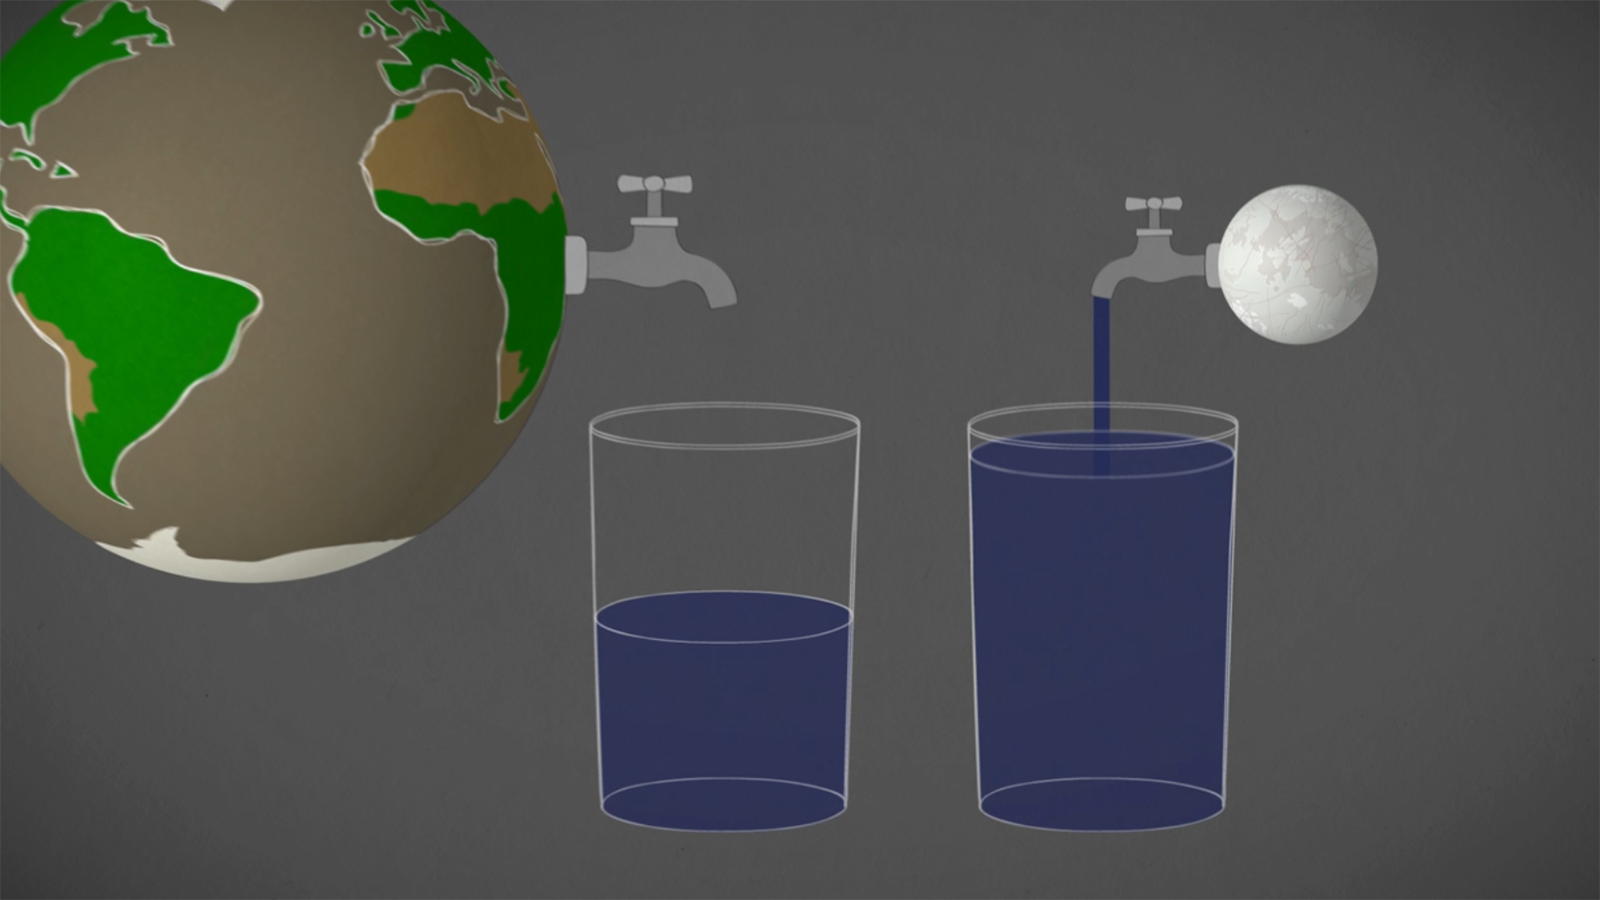 55_Water_Compare_1600.png